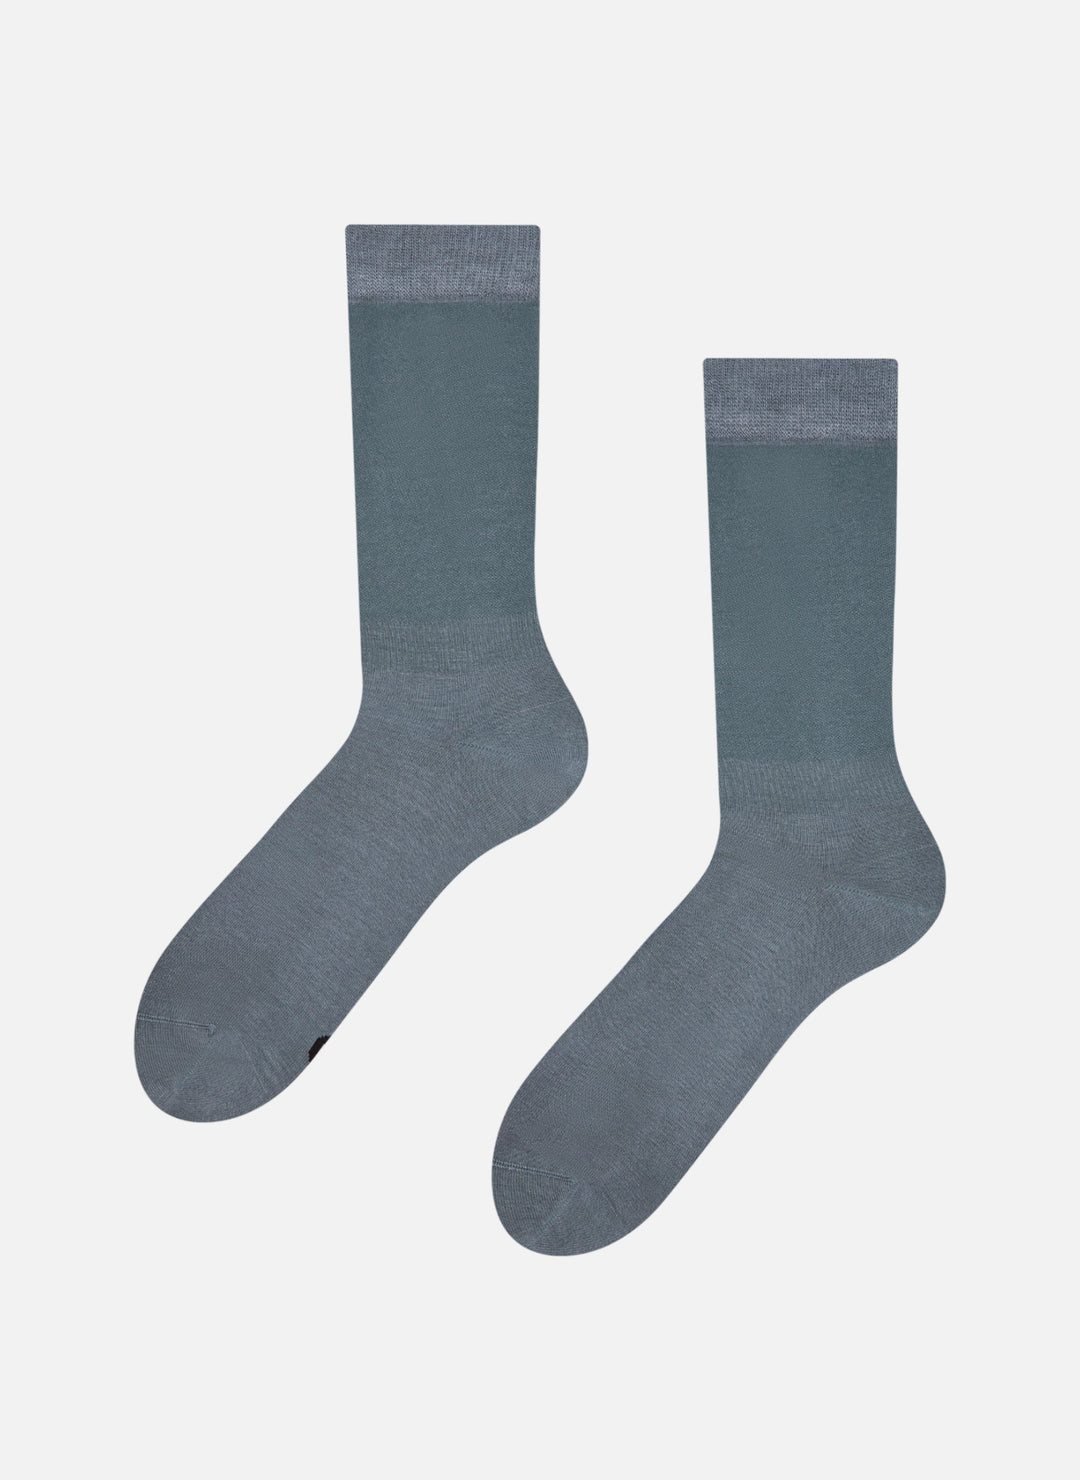 Chaussettes Bambou Confort anthracites